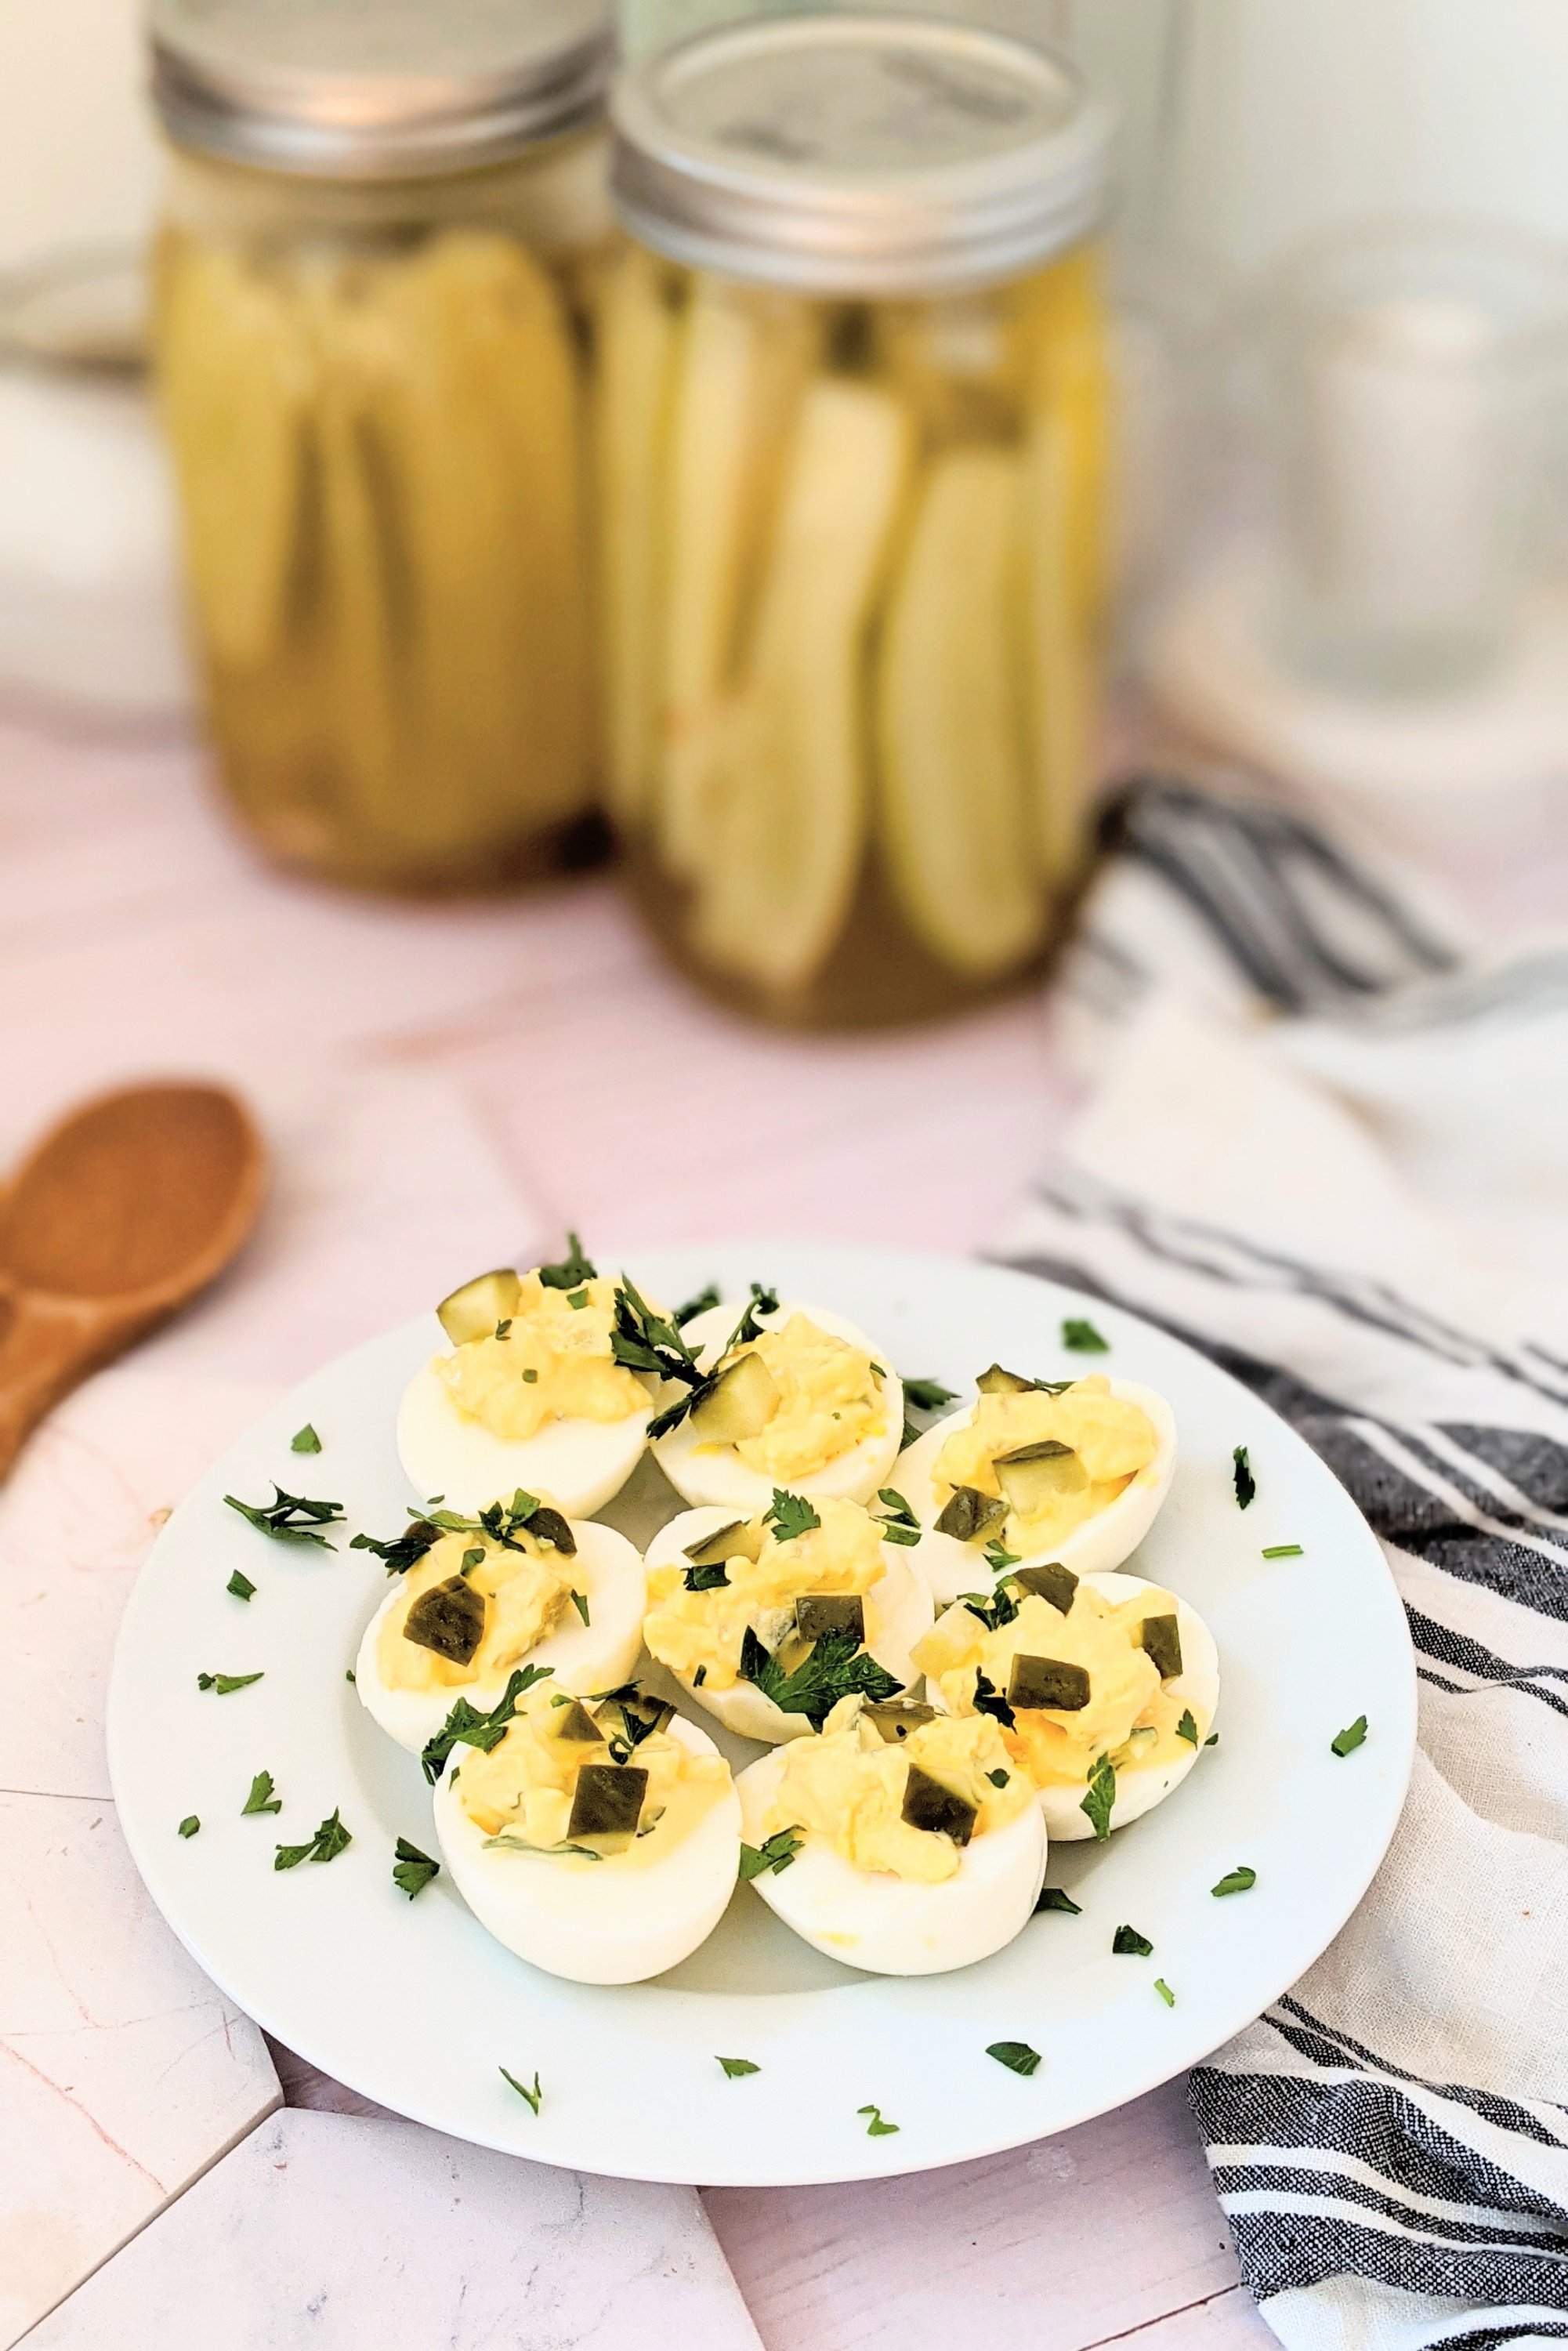 dill pickle deviled eggs recipe keto gluten free low carb snacks with pickles recipes ketosis pickles egg and pickle recipes low carb bbq appetizers meatless keto snacks